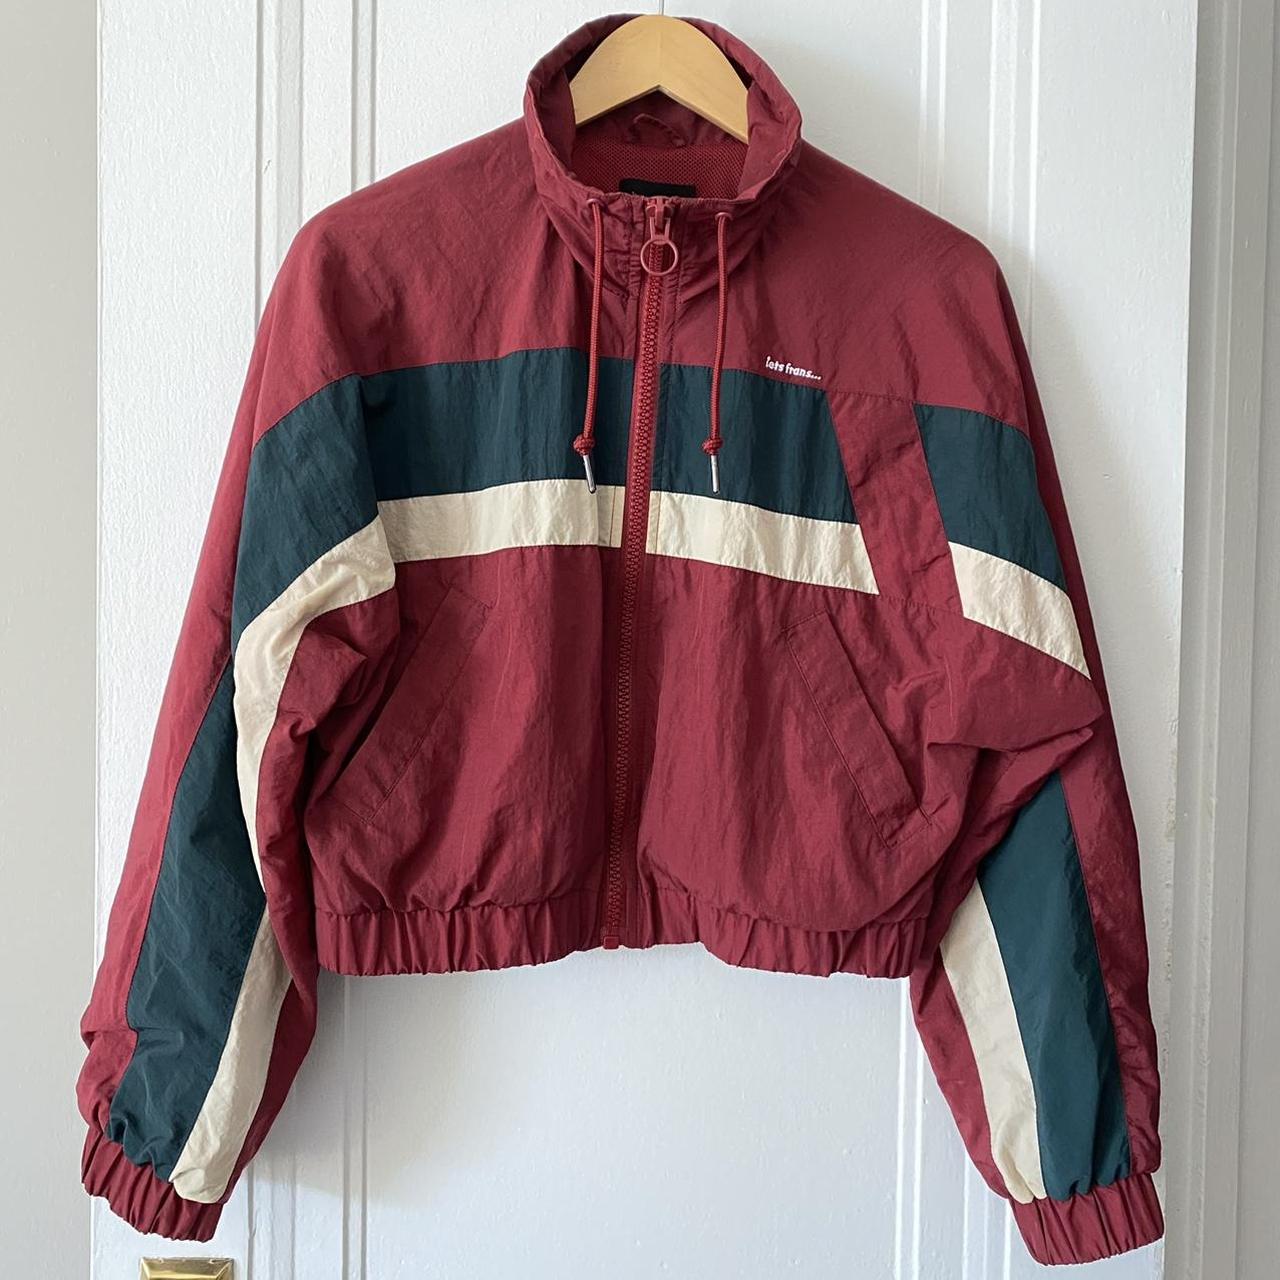 Urban Outfitters Women's Burgundy Jacket (2)